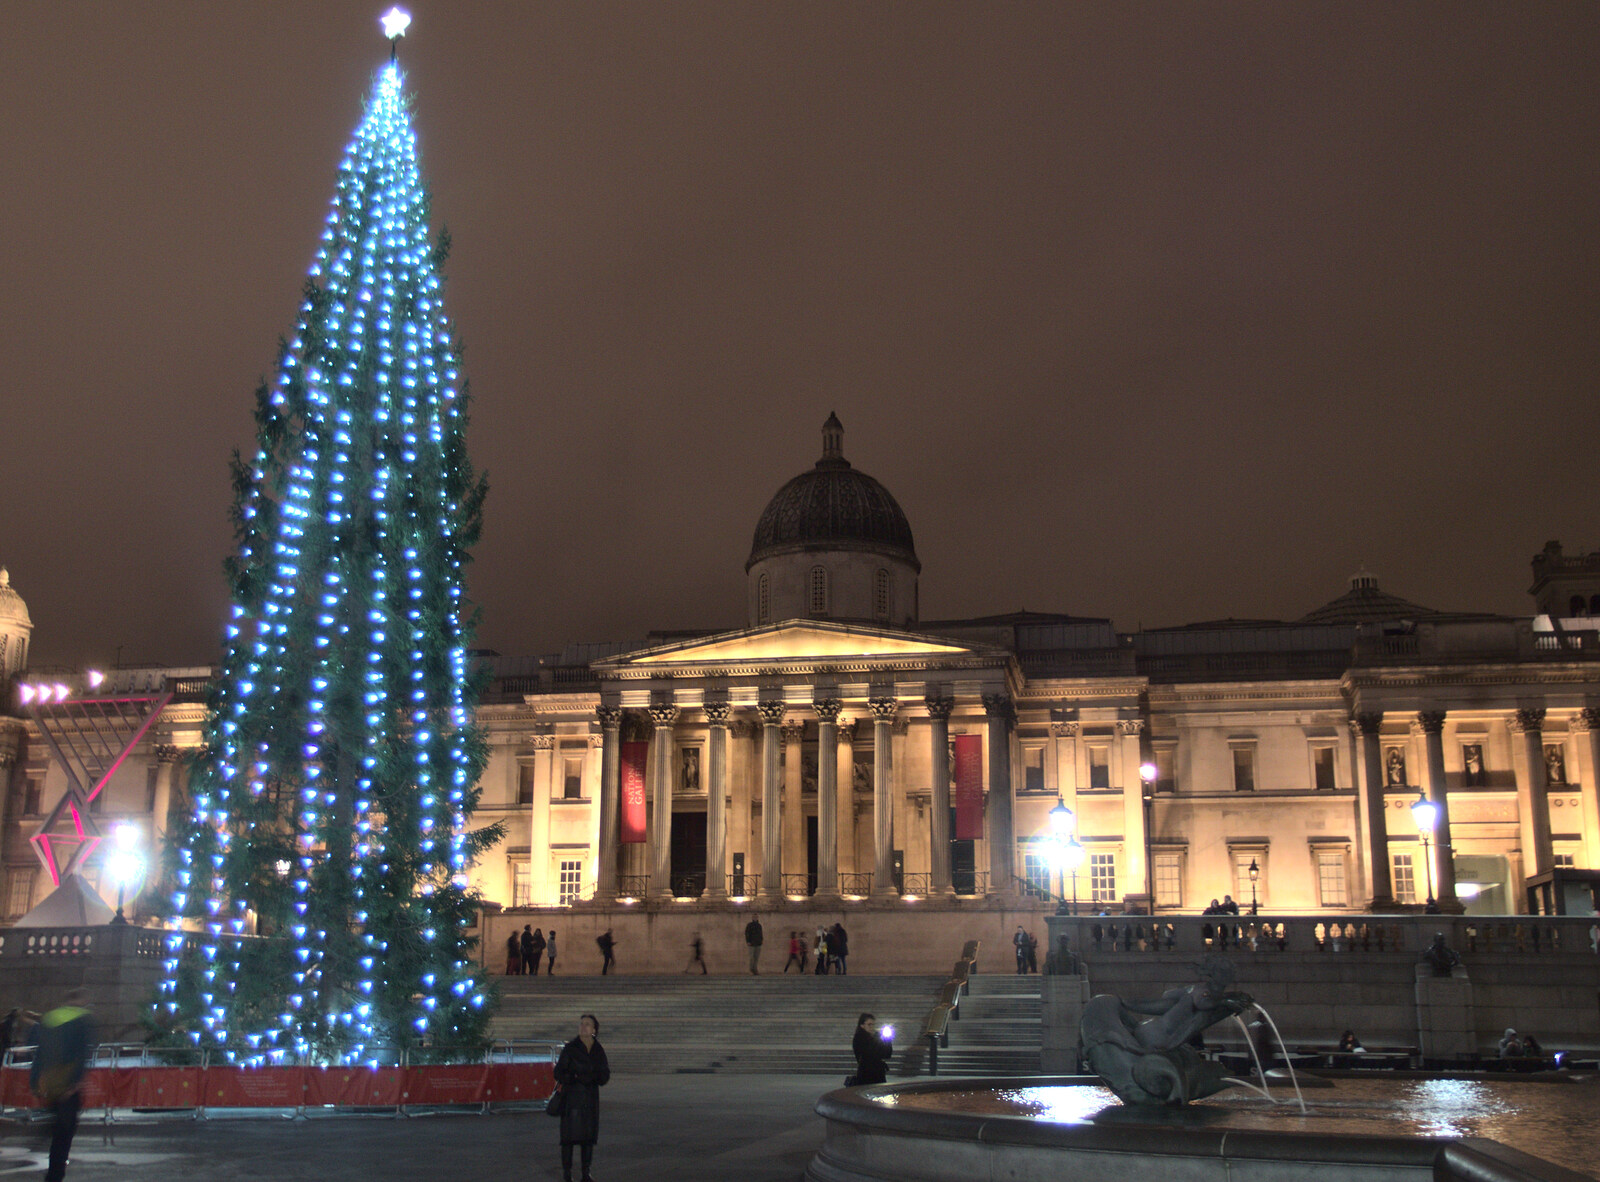 The National Gallery from SwiftKey Innovation Nights, Westminster, London - 19th December 2014